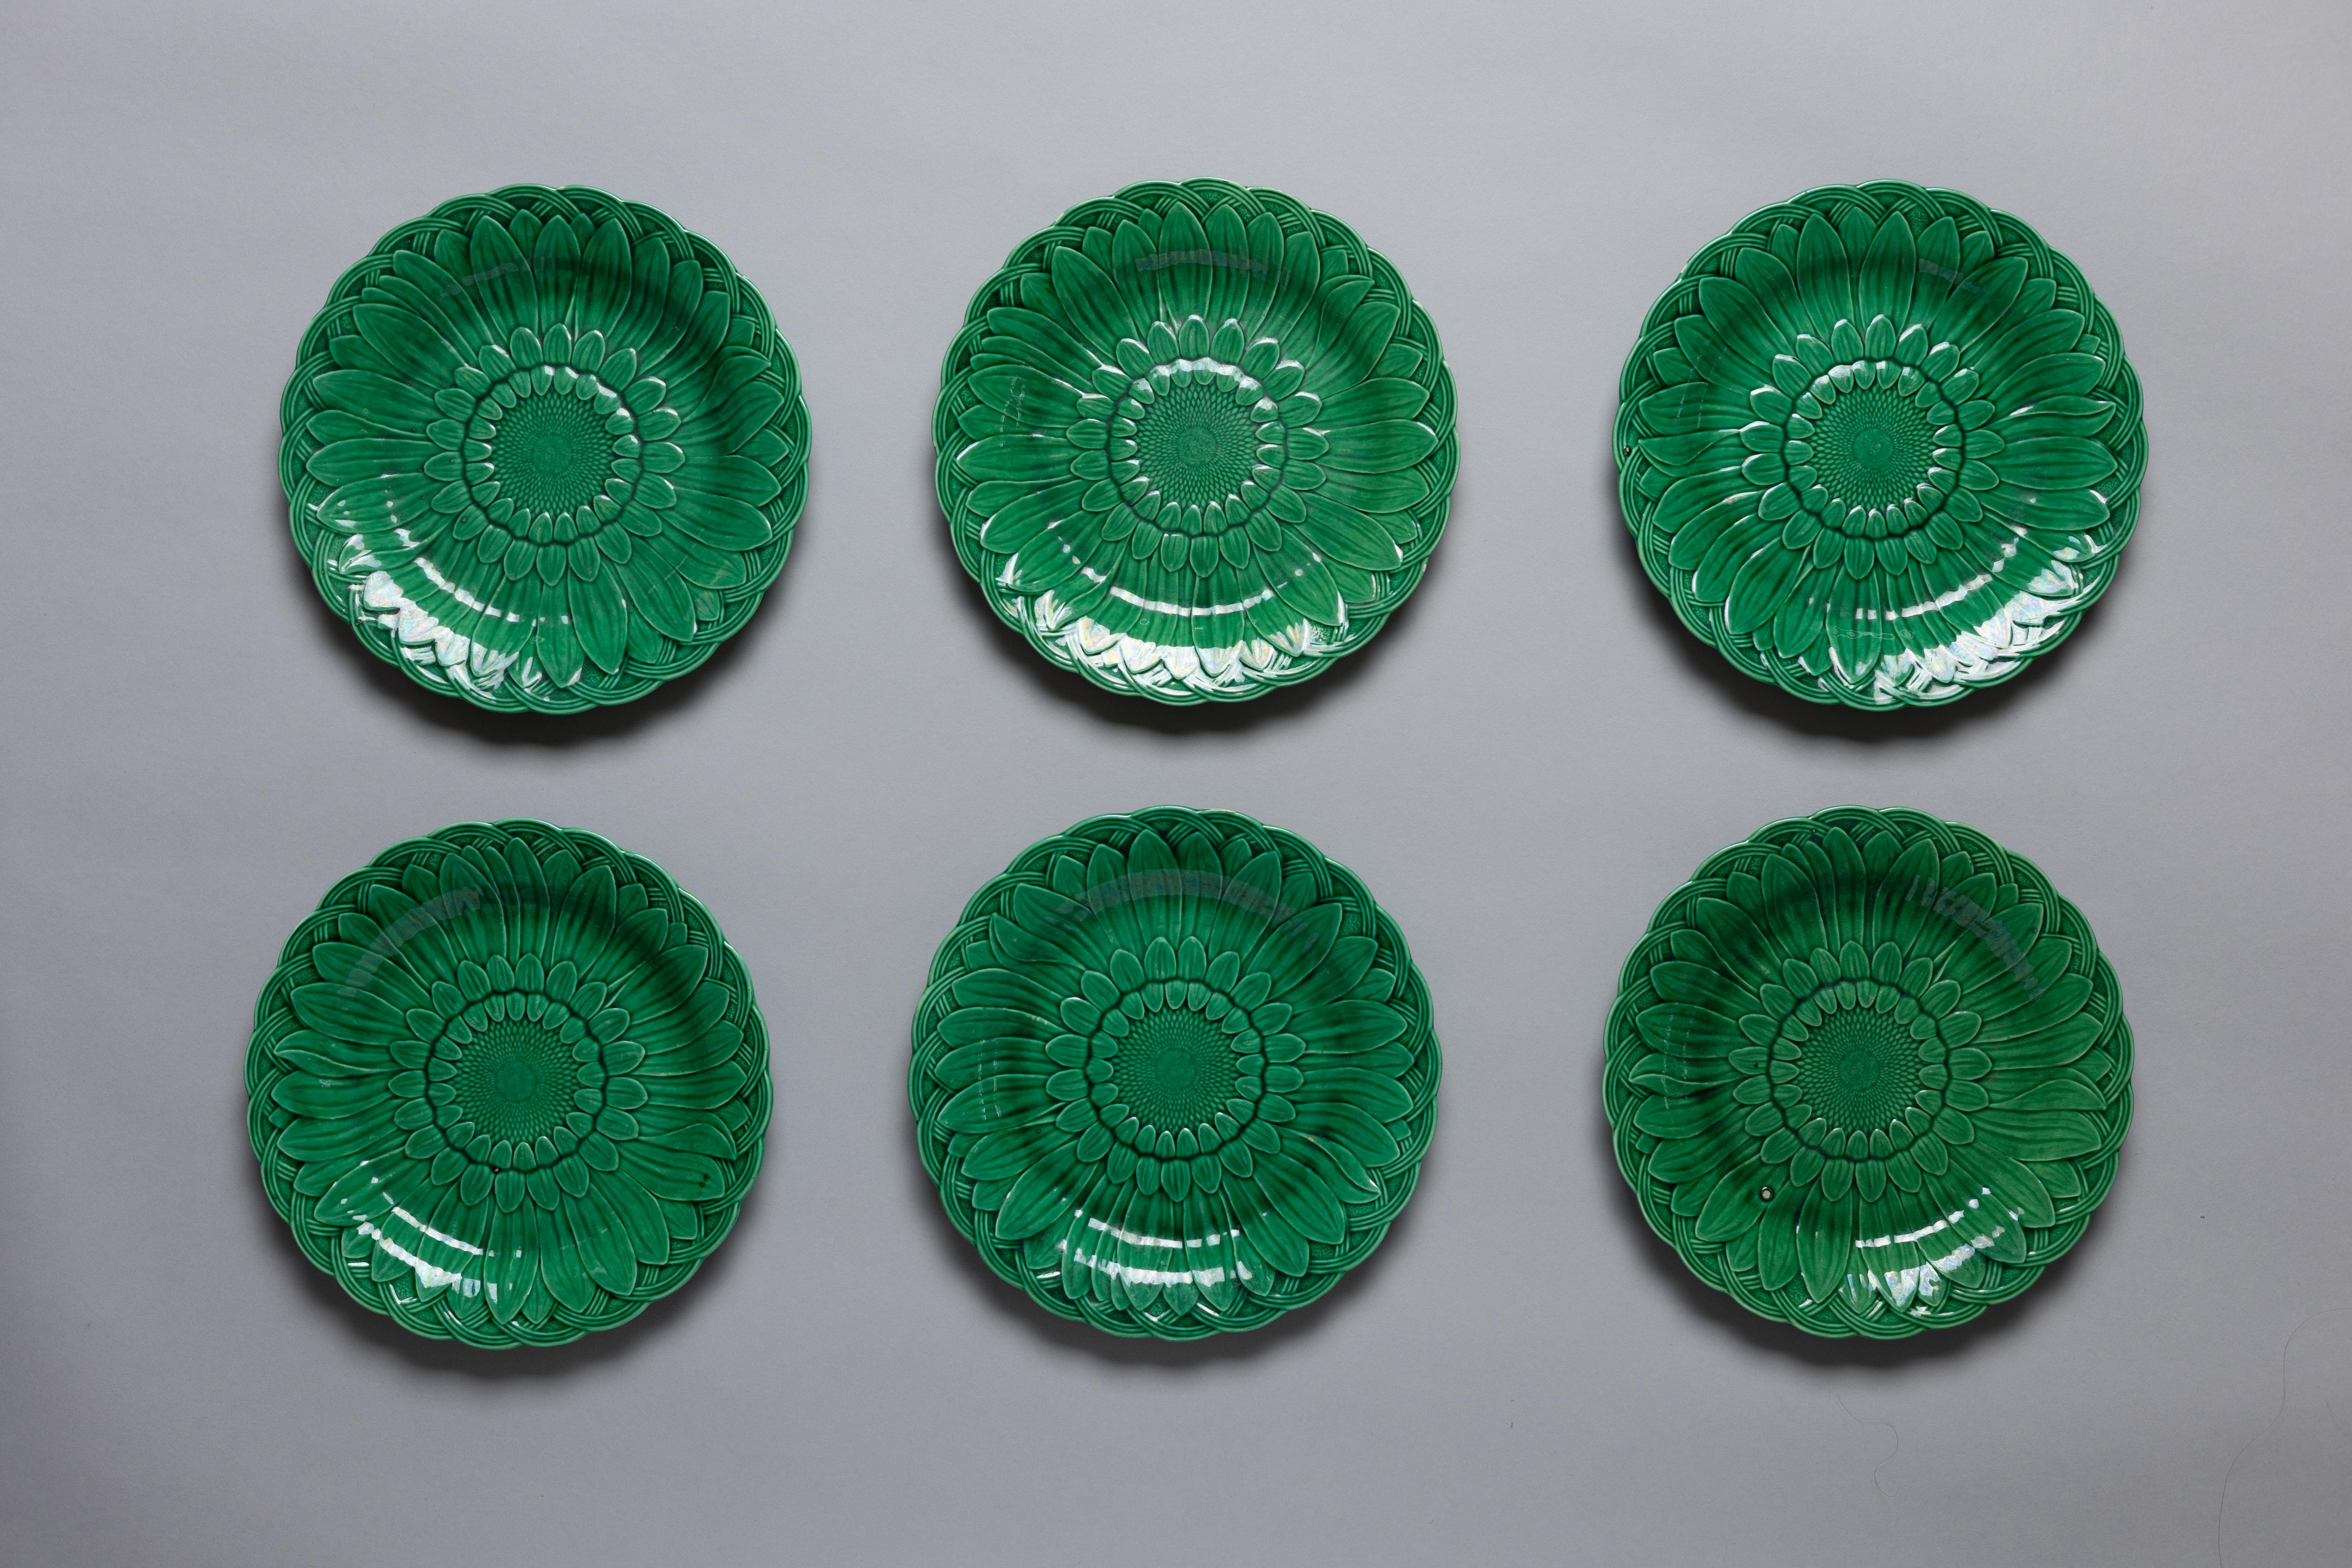 Set of 6 green majolica glazed dinner plates in the ‘Sunflower’ pattern by Wedgwood, made circa 1880.

The sunflower, alongside the calla lily and peacock feather, became an emblem of the late nineteenth-century Aesthetic Movement. Oscar Wilde